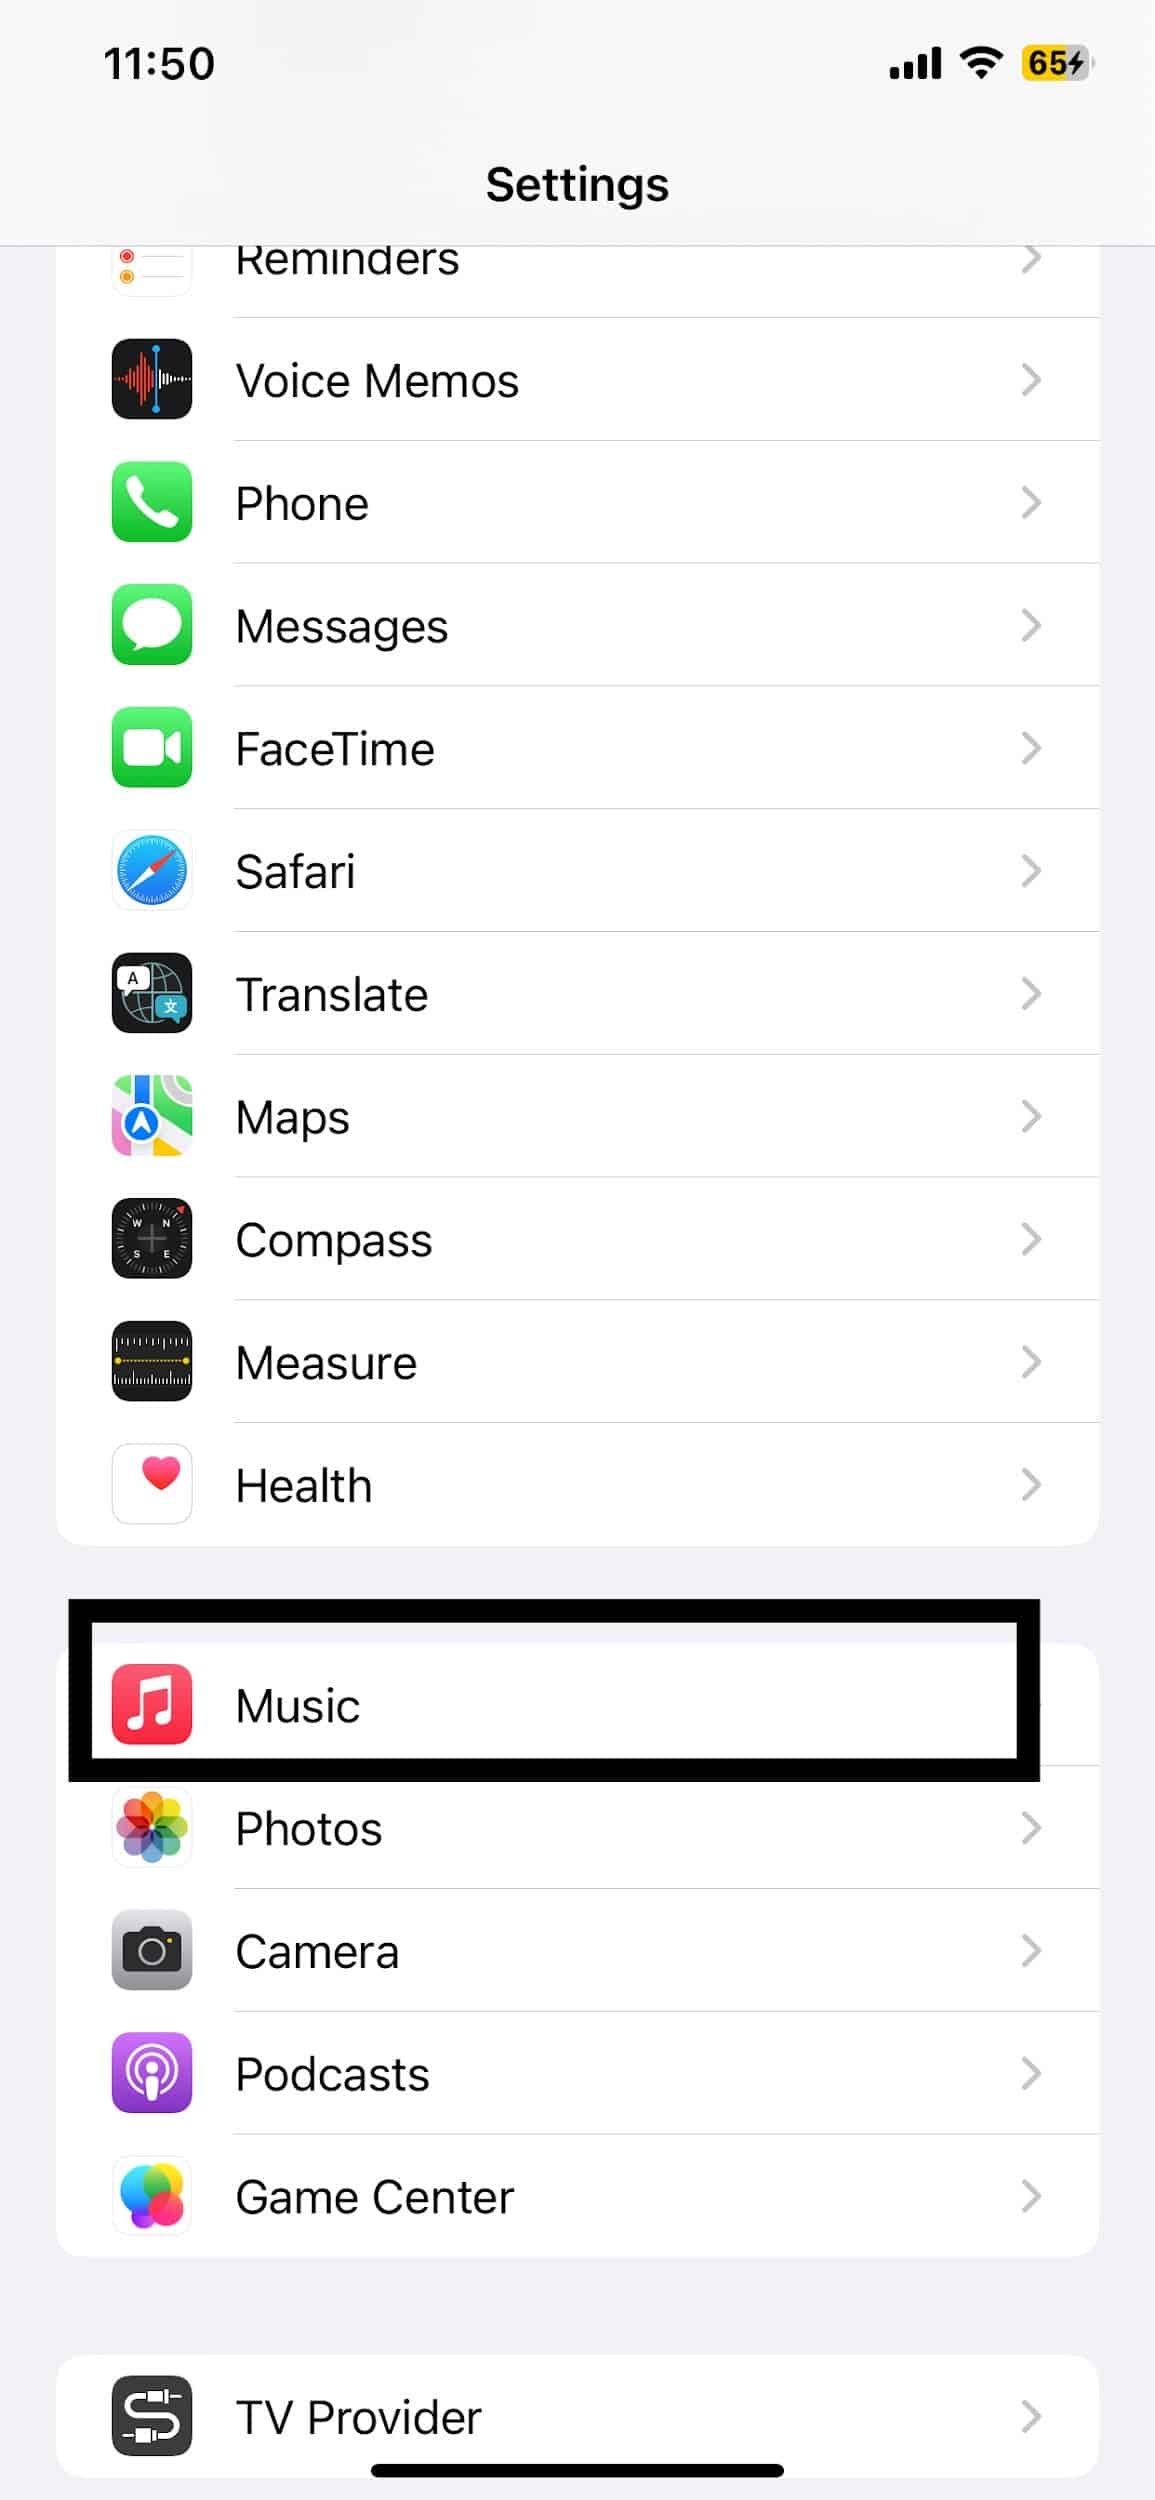 Trun off the EQ settings on your iOS device to fix the issue when one Airpod is louder than the other